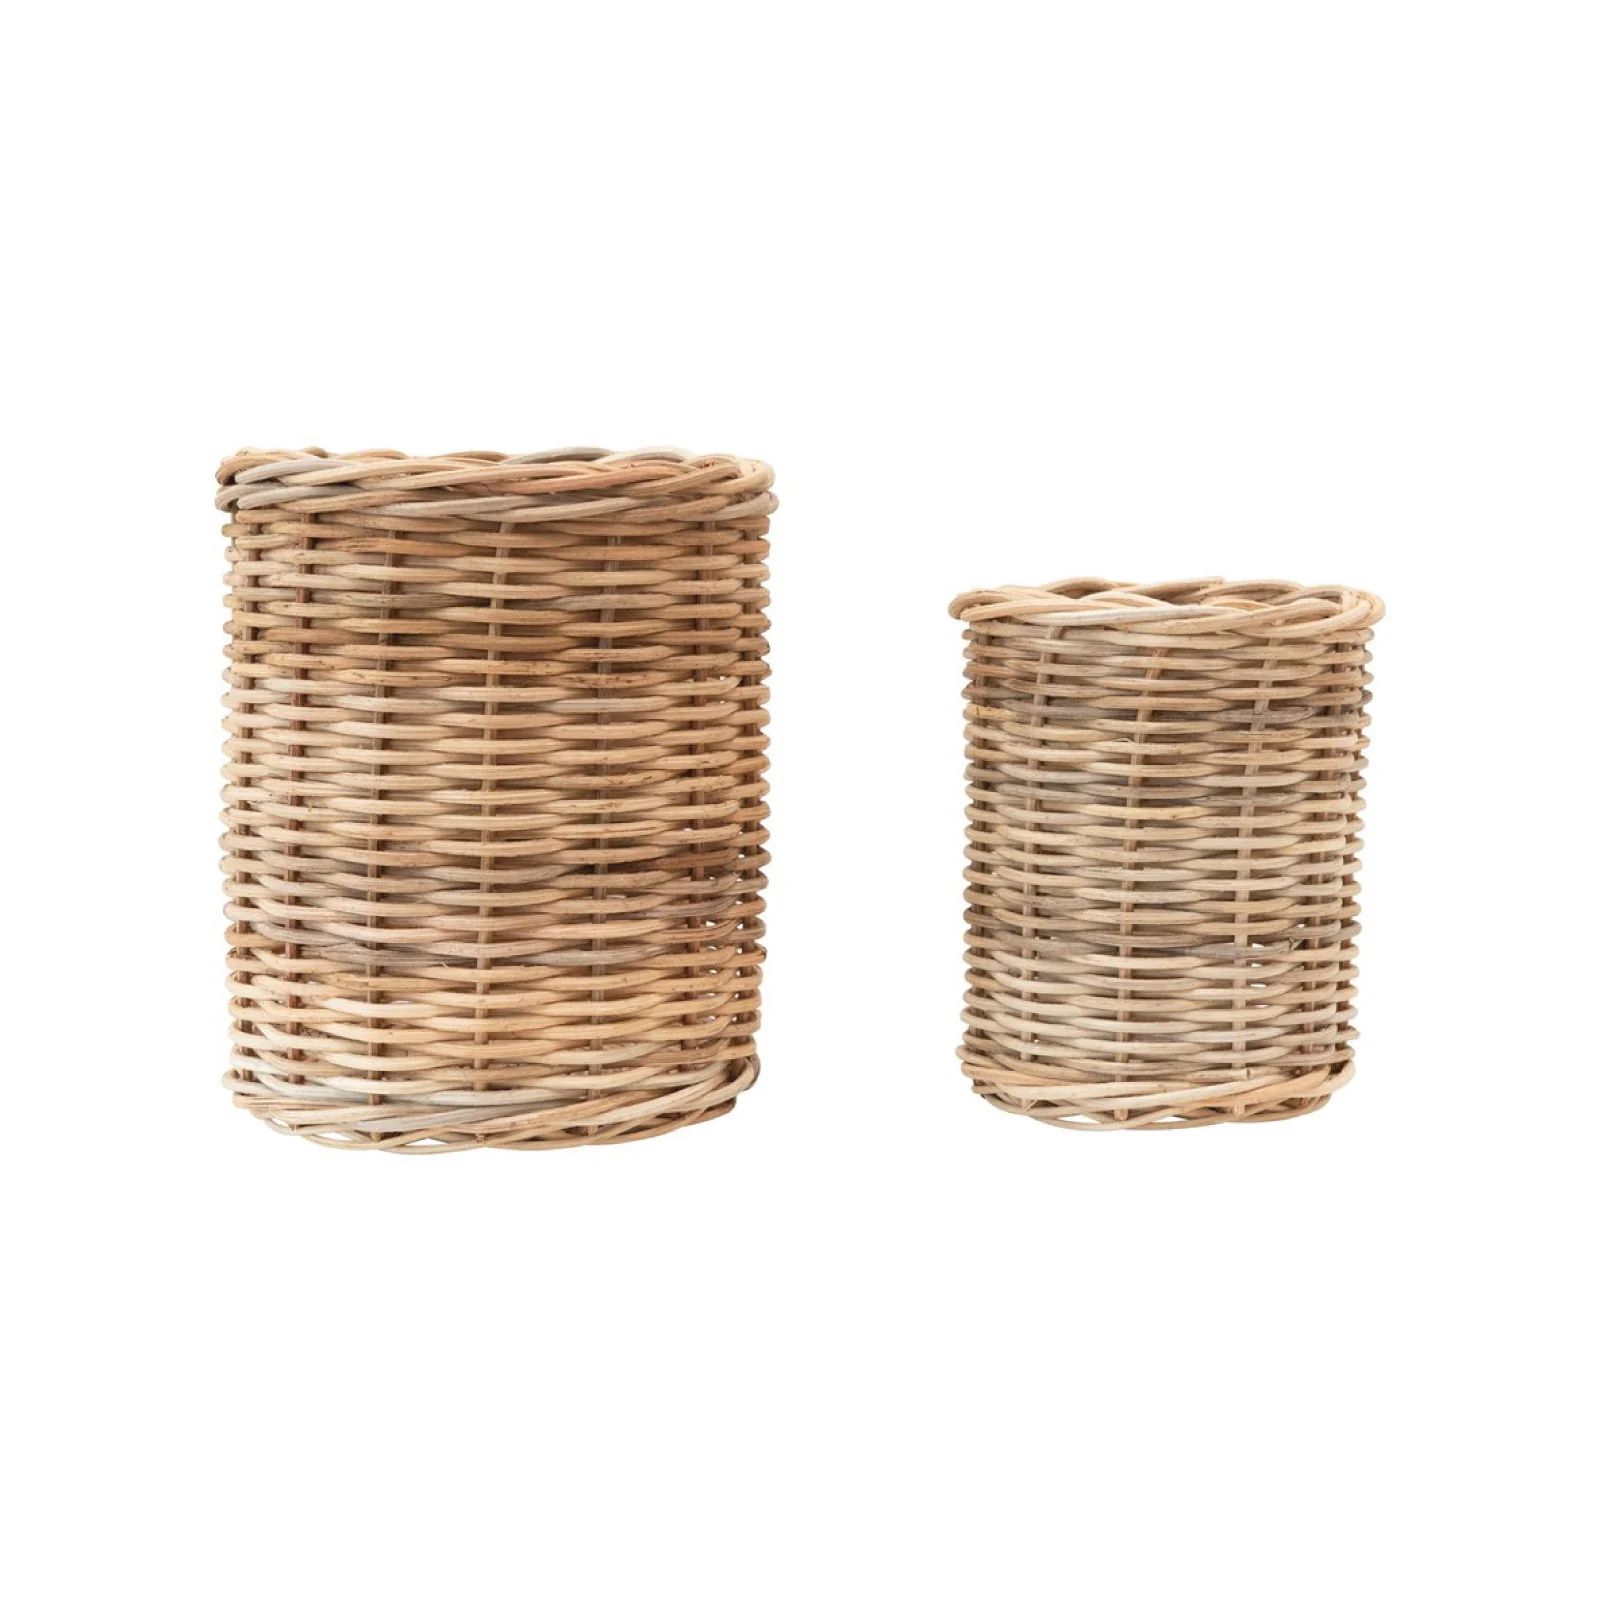 Wicker Container Set | Brooke and Lou